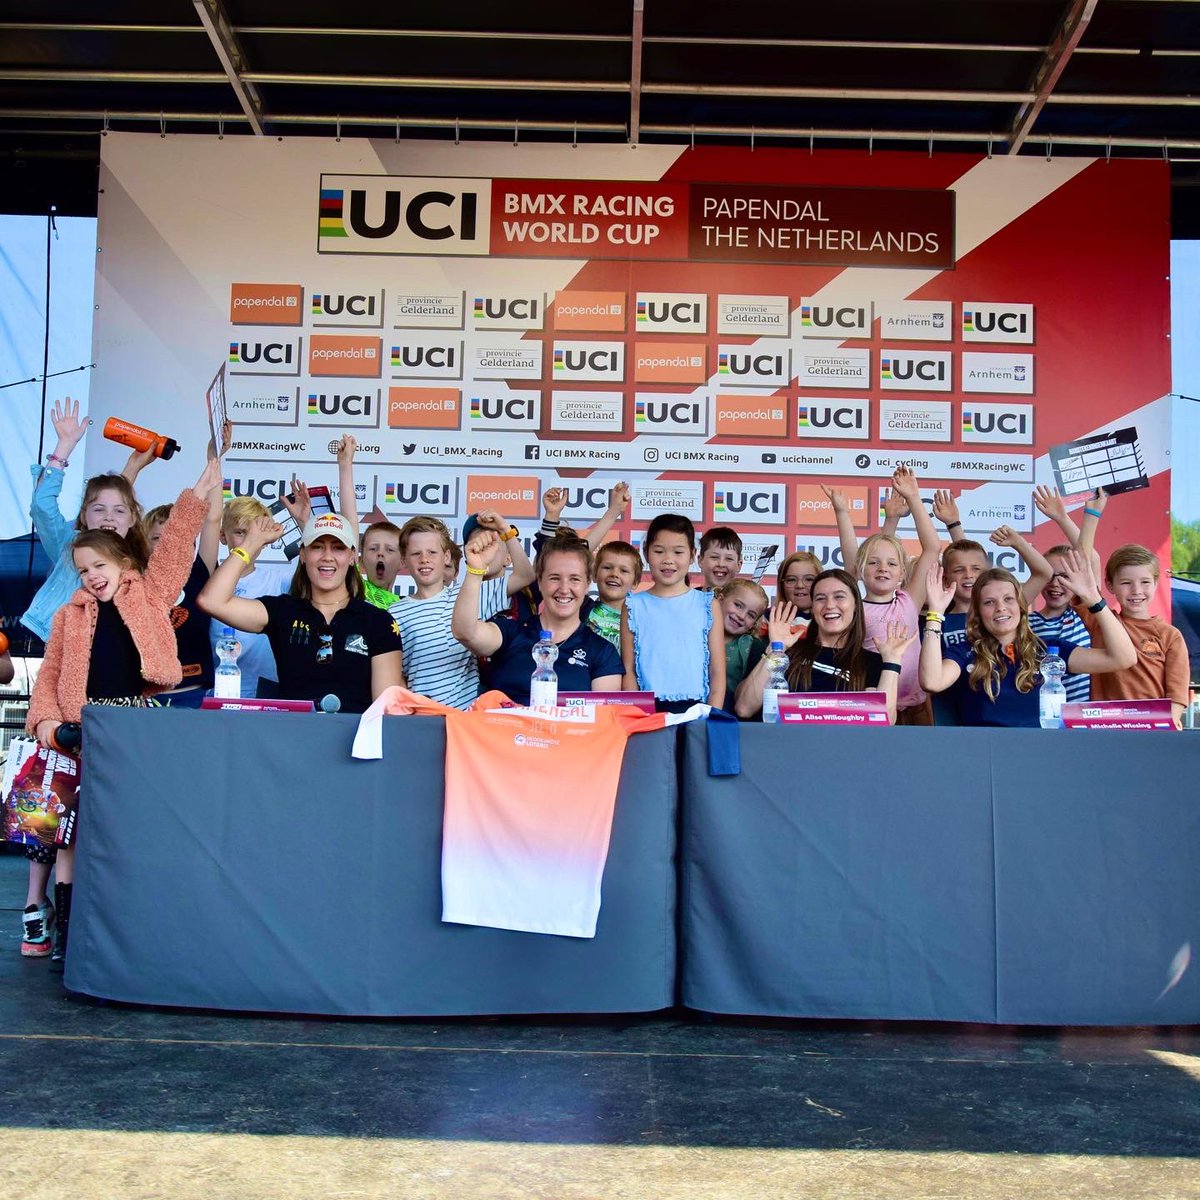 The press conference kicked things off here in Papendal 🎤 Riders answered questions from local media and school children about this weekend’s competition and Olympic qualification 👏 #BMXRacingWC